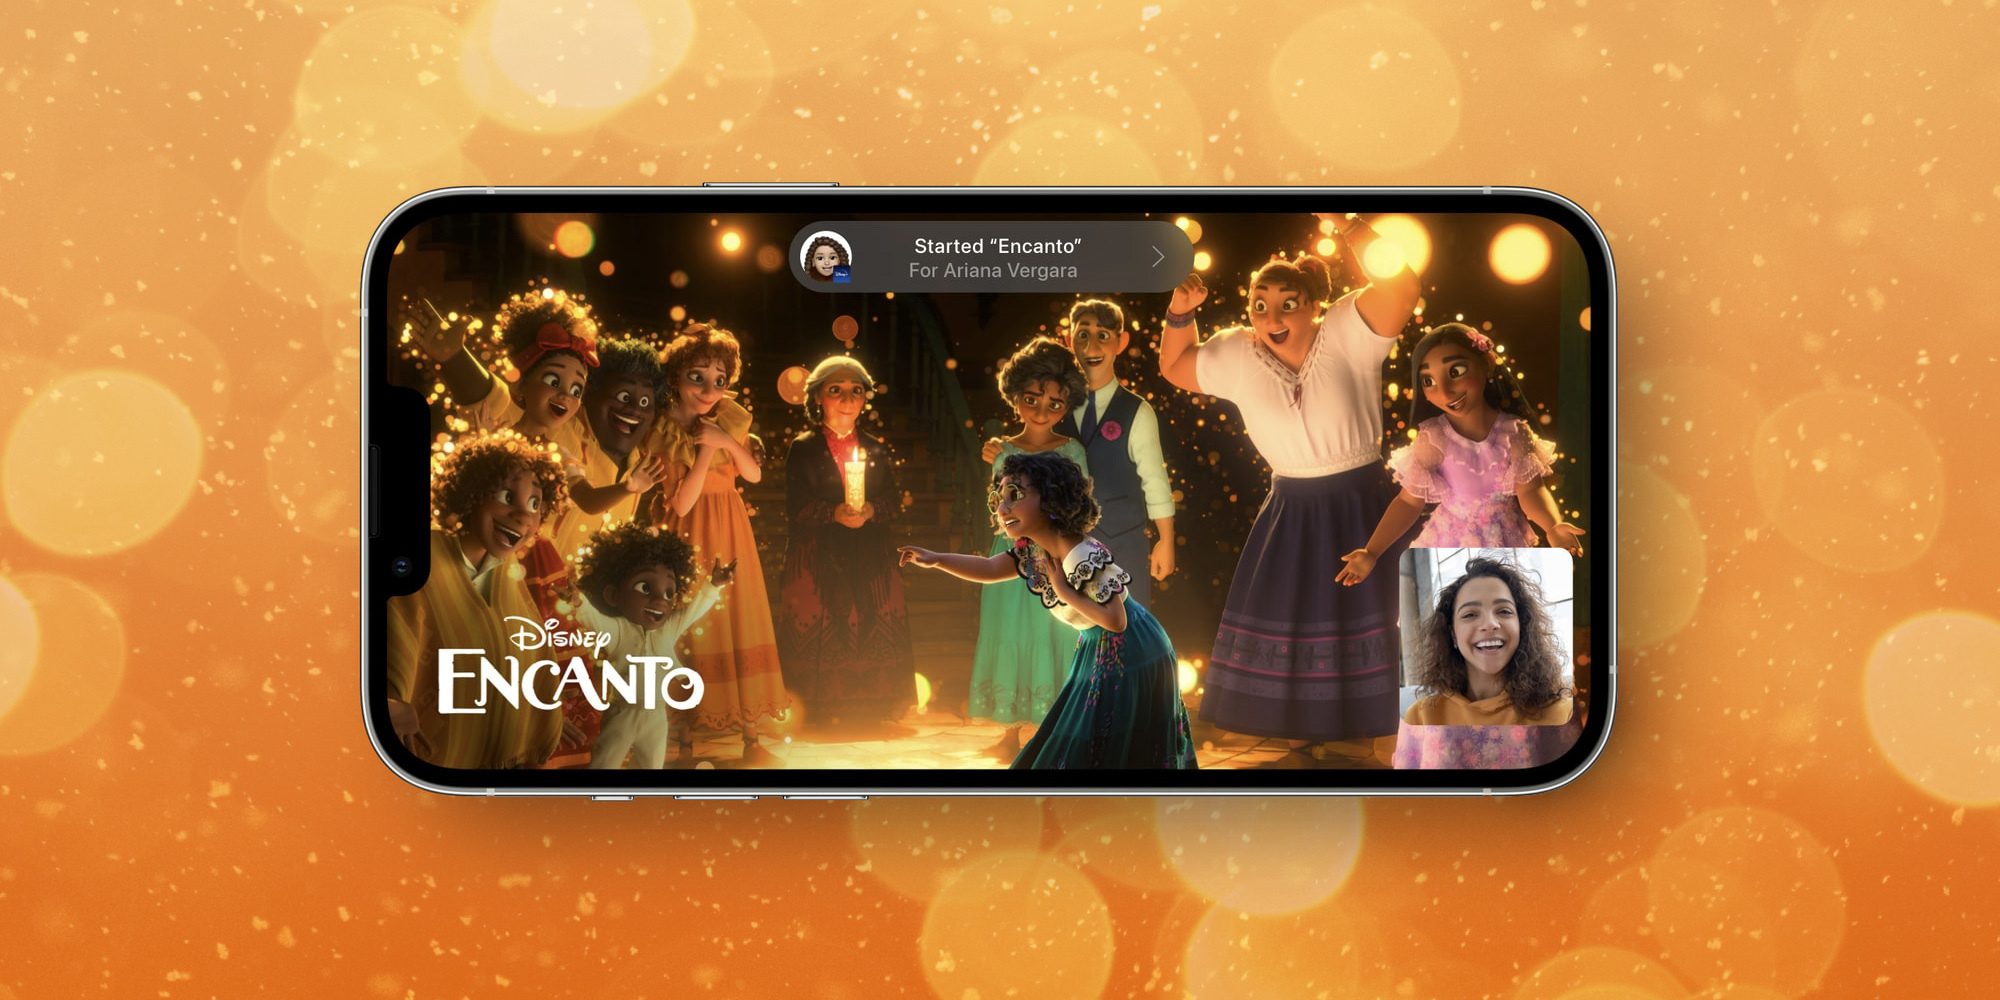 Apple Users Can Now Watch Disney+ With Friends Via SharePlay